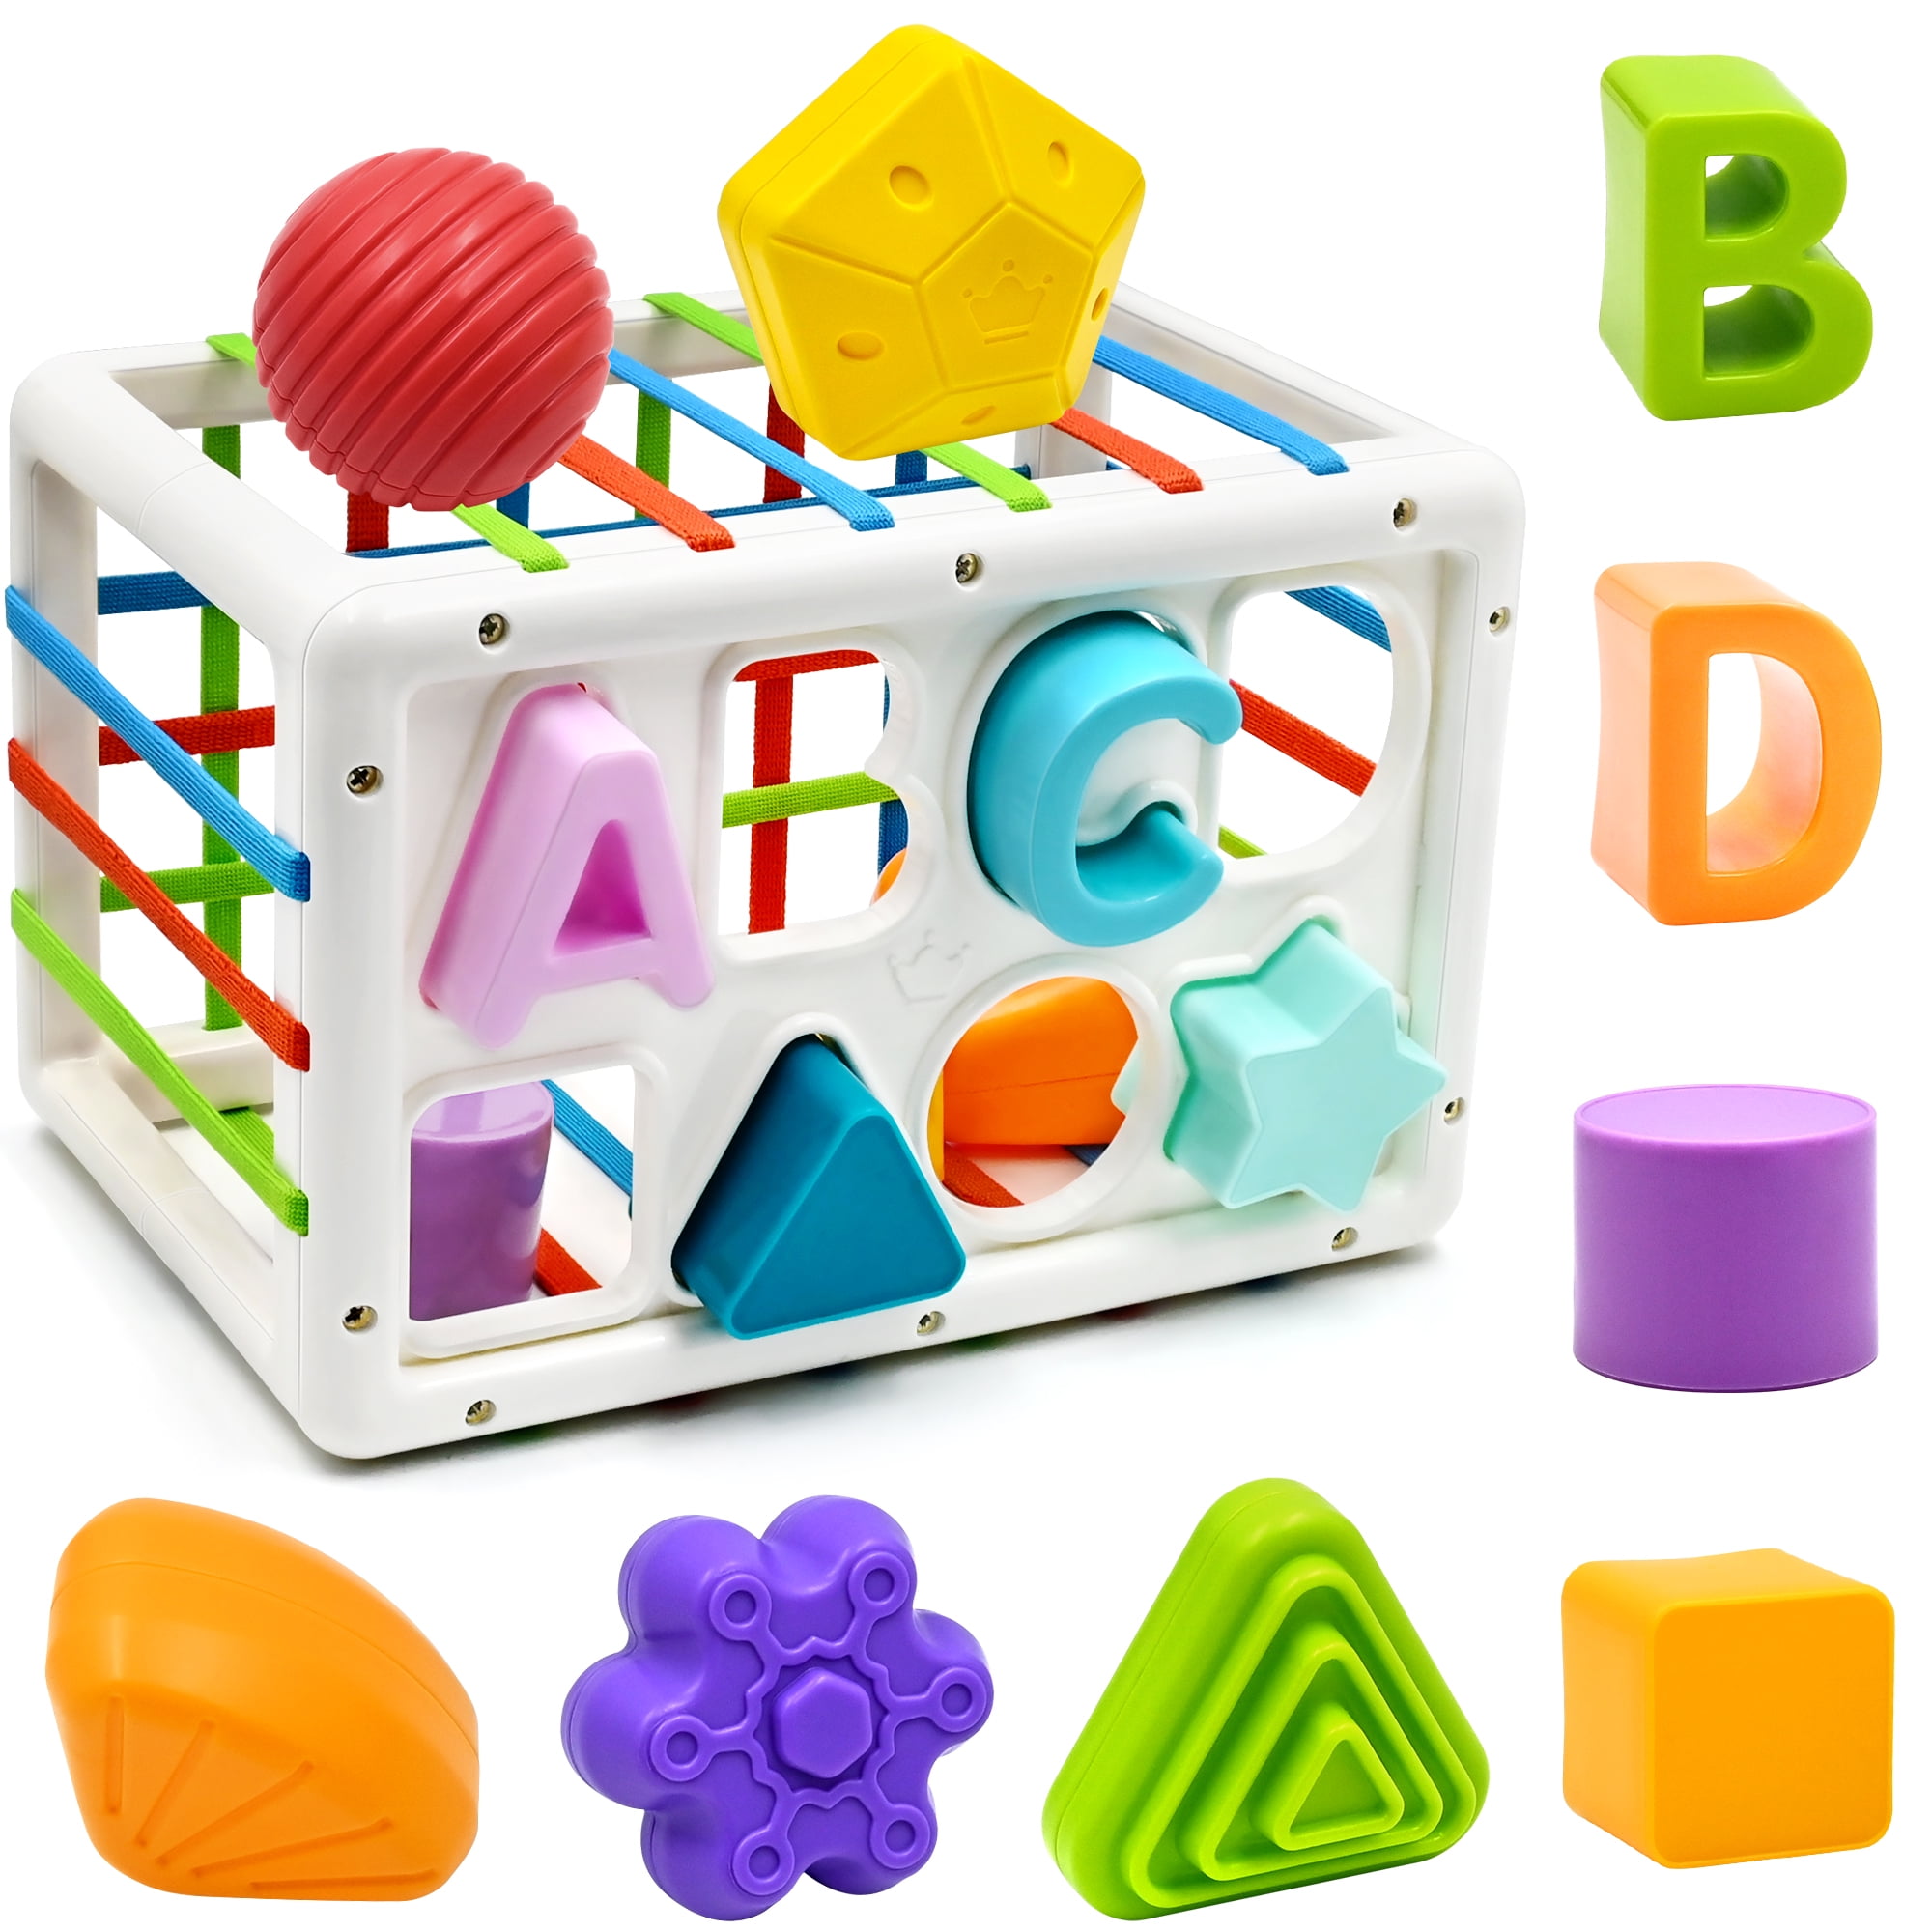 Educational Toys for 6 Year Olds